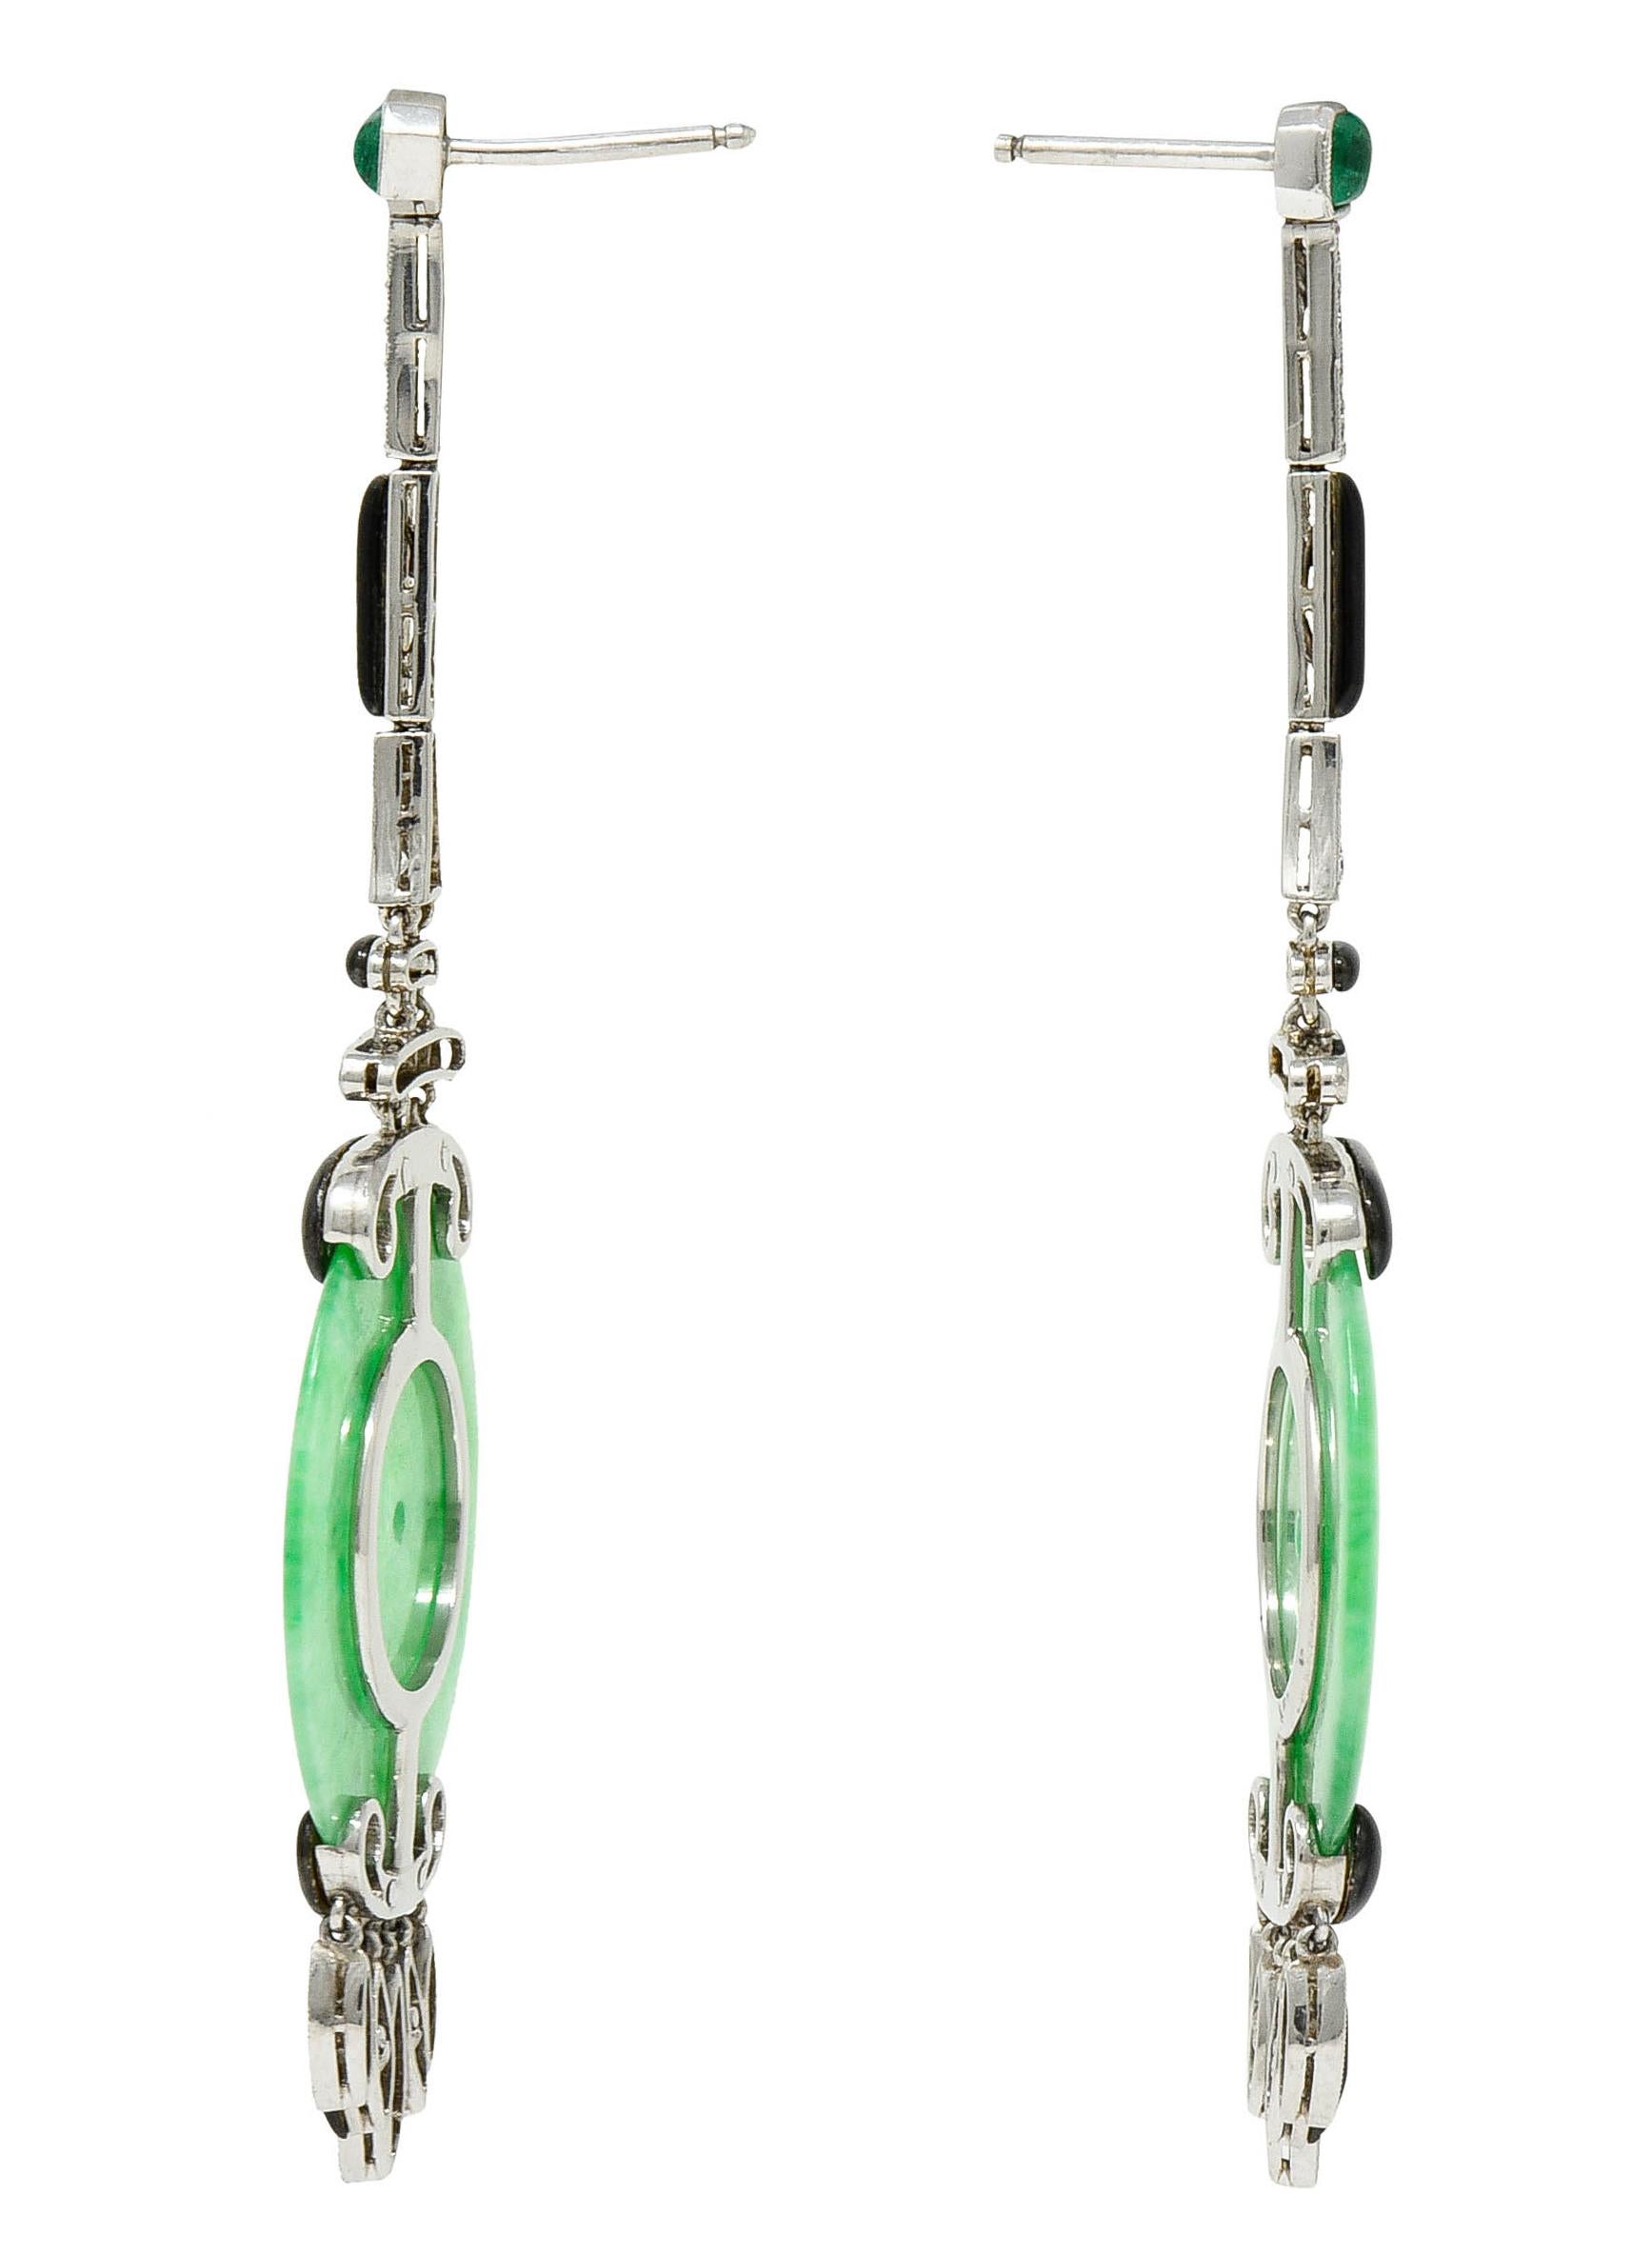 Art Deco style earrings with surmounts bezel set with emerald cabochons

Sugarloaf cut and blueish green in color while weighing in total approximately 0.30 carat

Accented by round brilliant cut diamonds weighing in total approximately 1.00 carat -